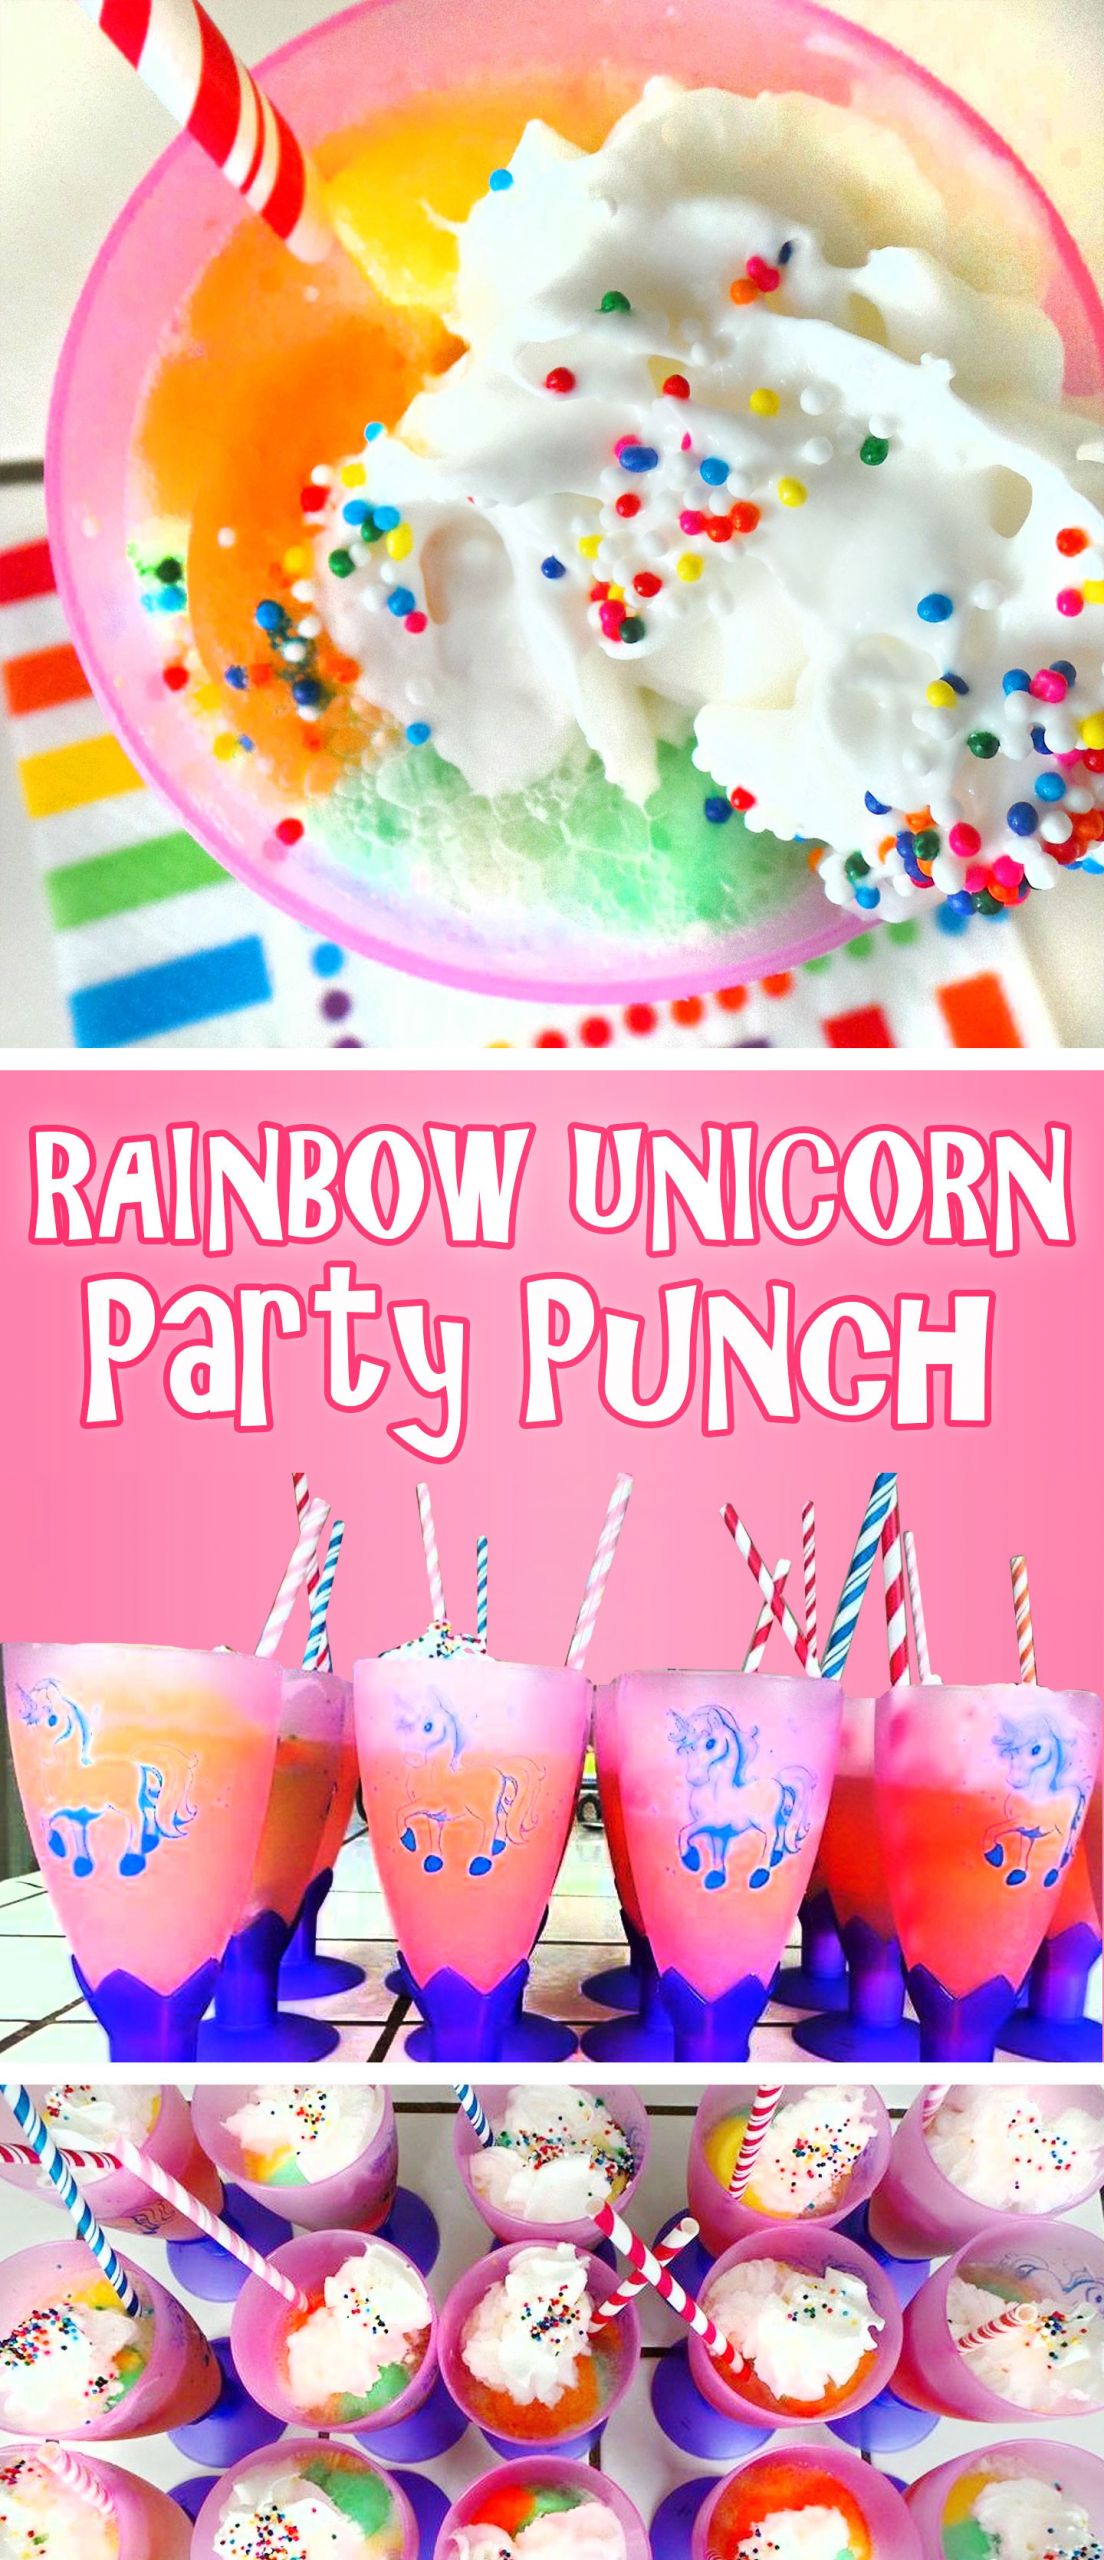 Food Ideas For Unicorn Party
 Rainbow Unicorn Party Punch